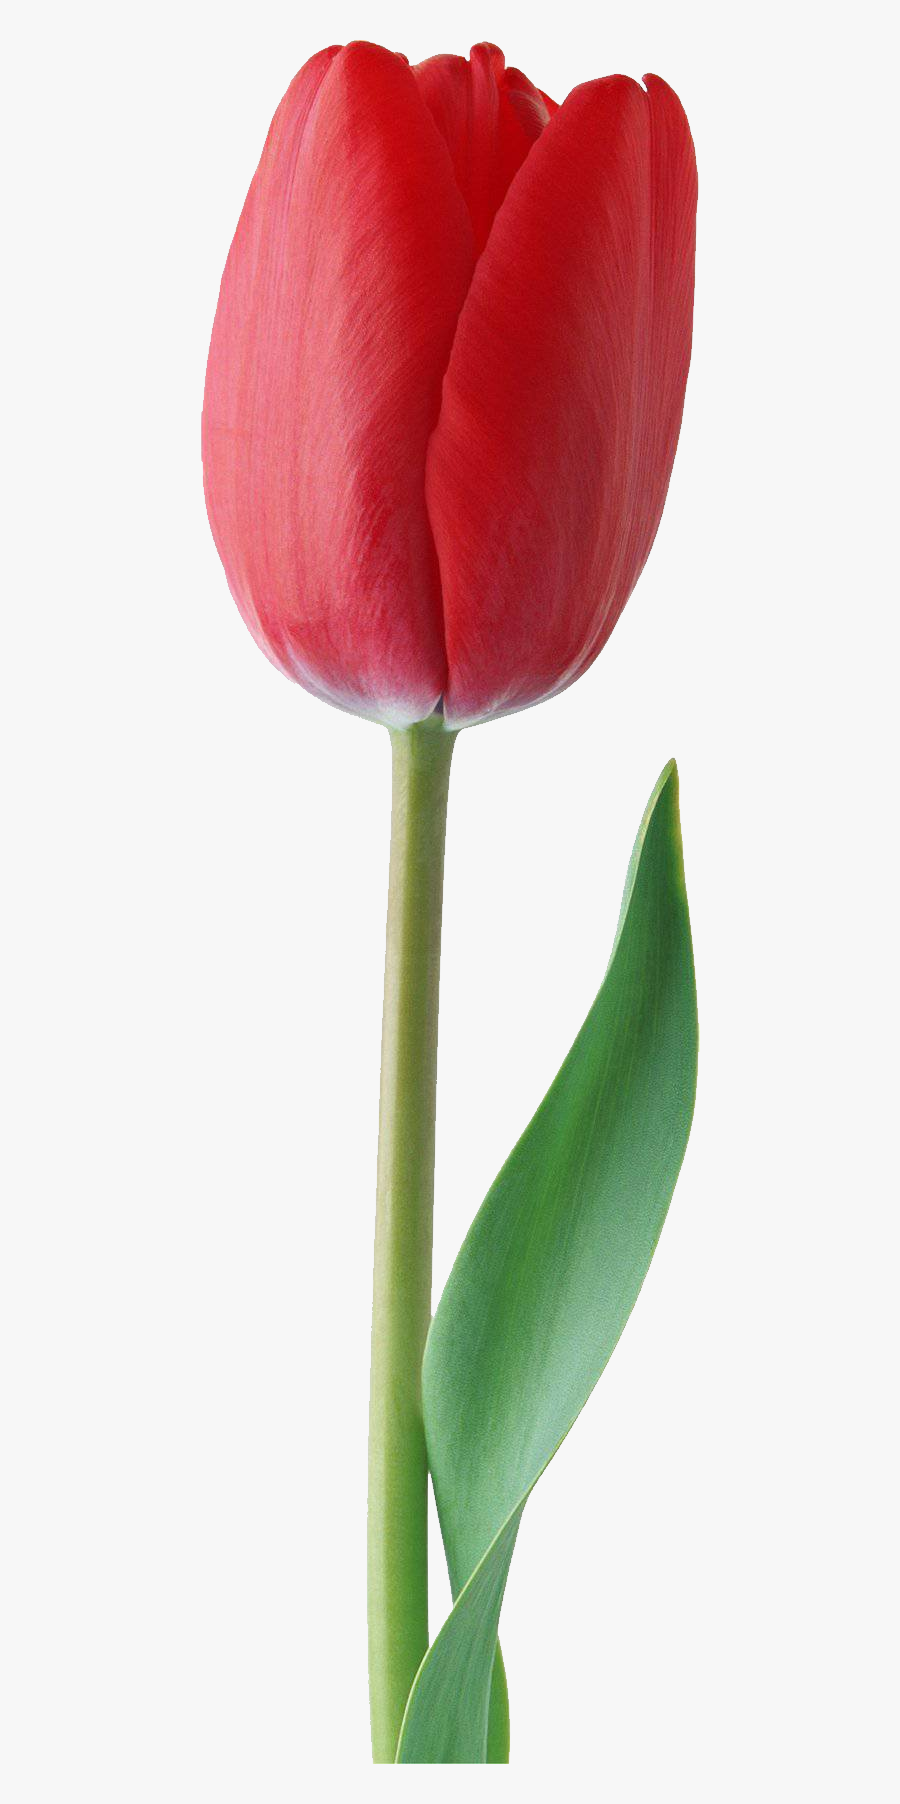 Tulip Png Images Free Download - Red Tulip Flower Png, Transparent Clipart